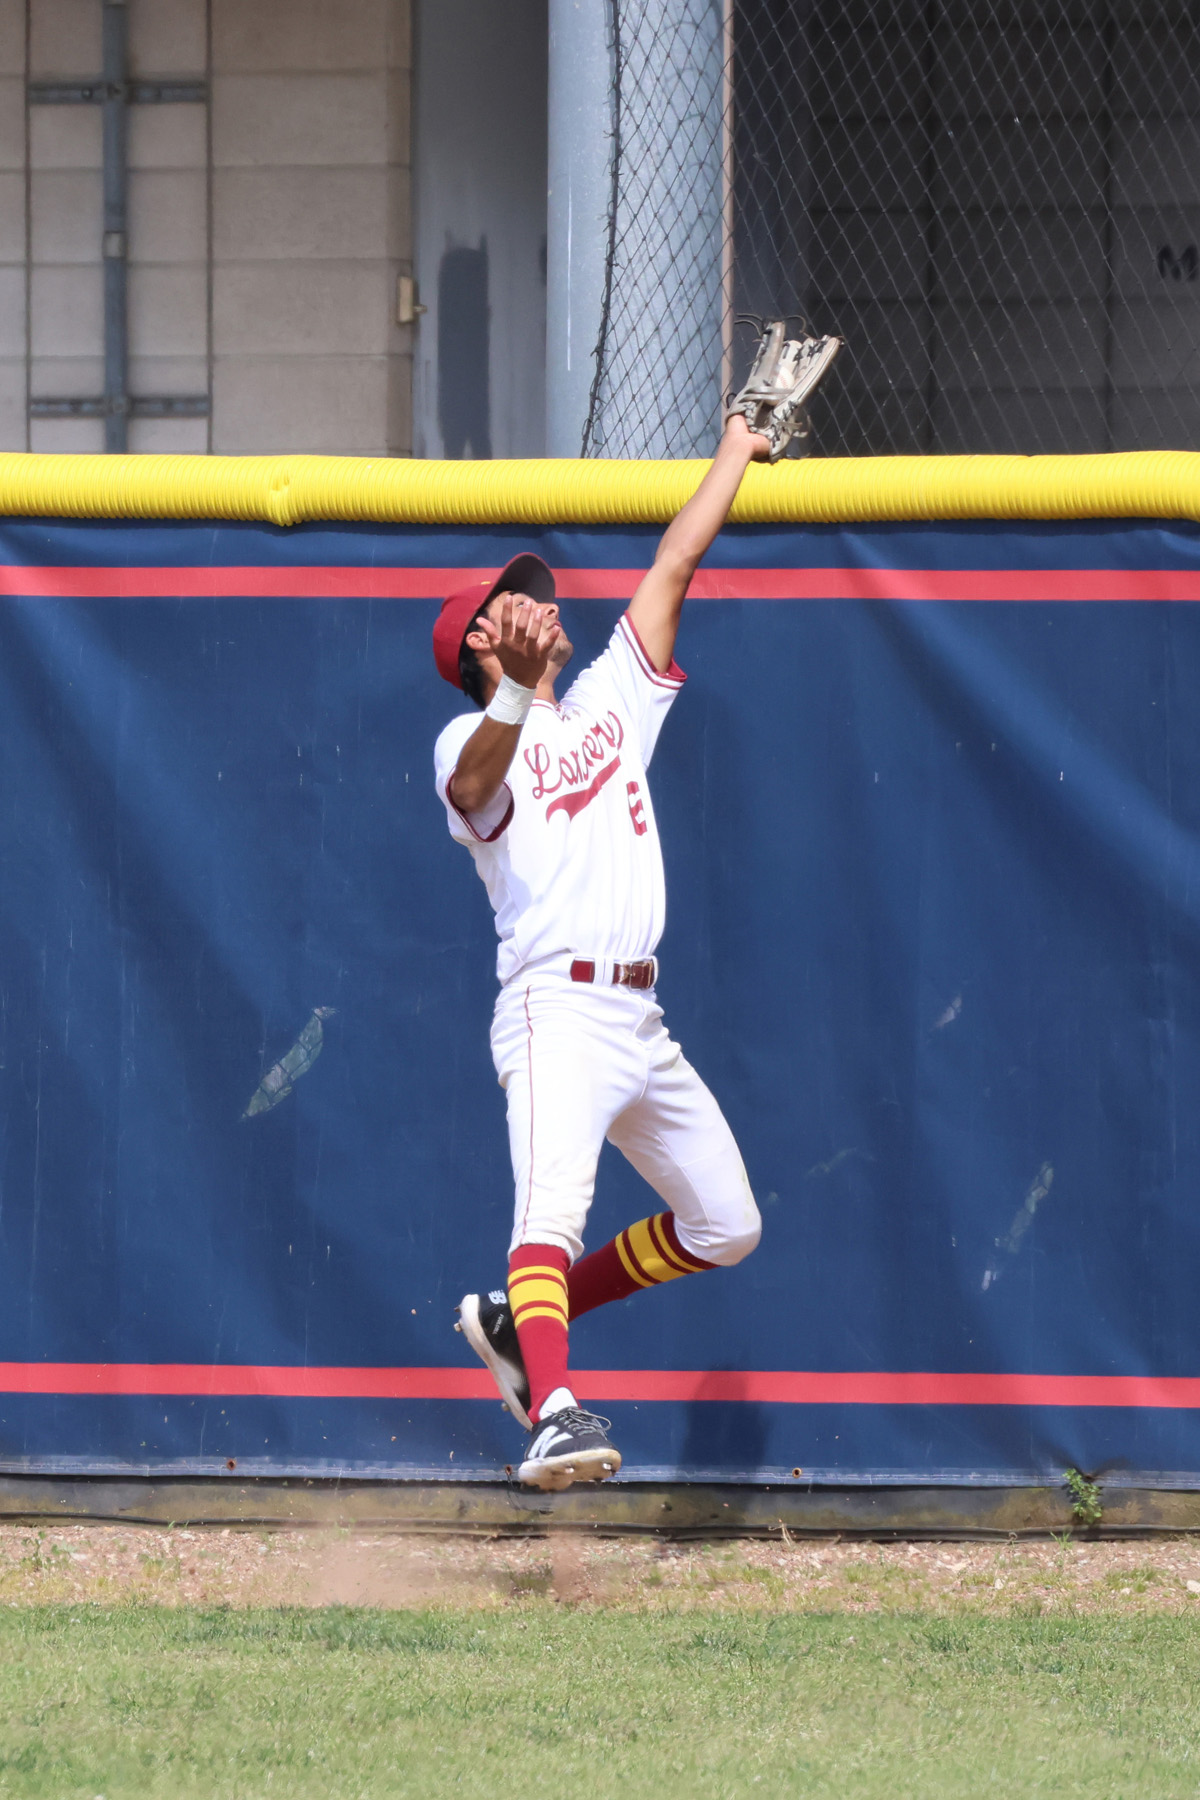 Thomas Villanueva with the circus catch that led to a double play in PCC's win on Wednesday (photo/gallery by Richard Quinton).